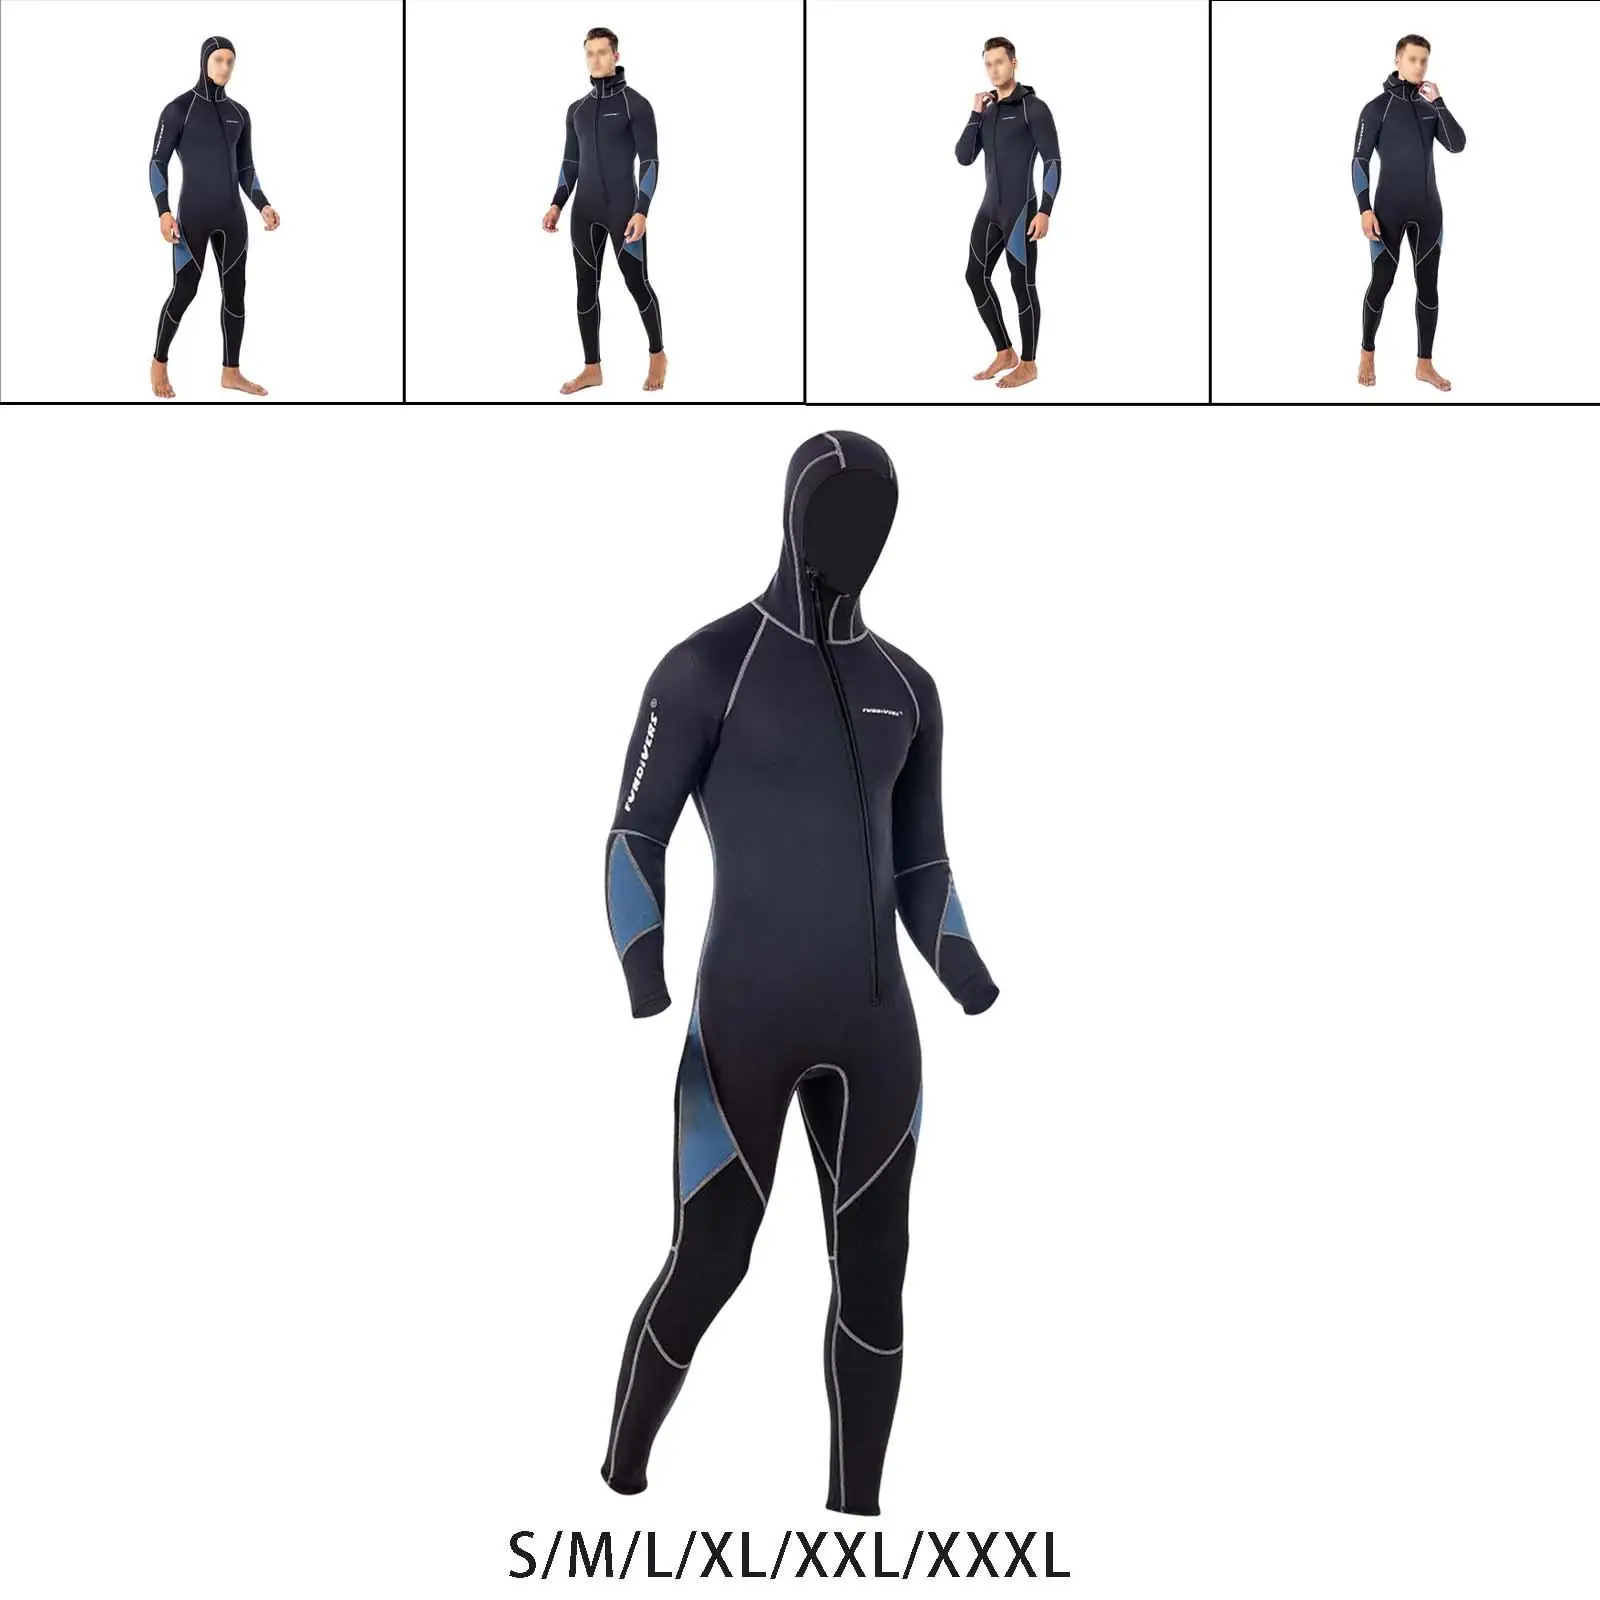 Man Hooded Wetsuit, Long Sleeve Portable Full Body Wetsuit for Kayaking Diving